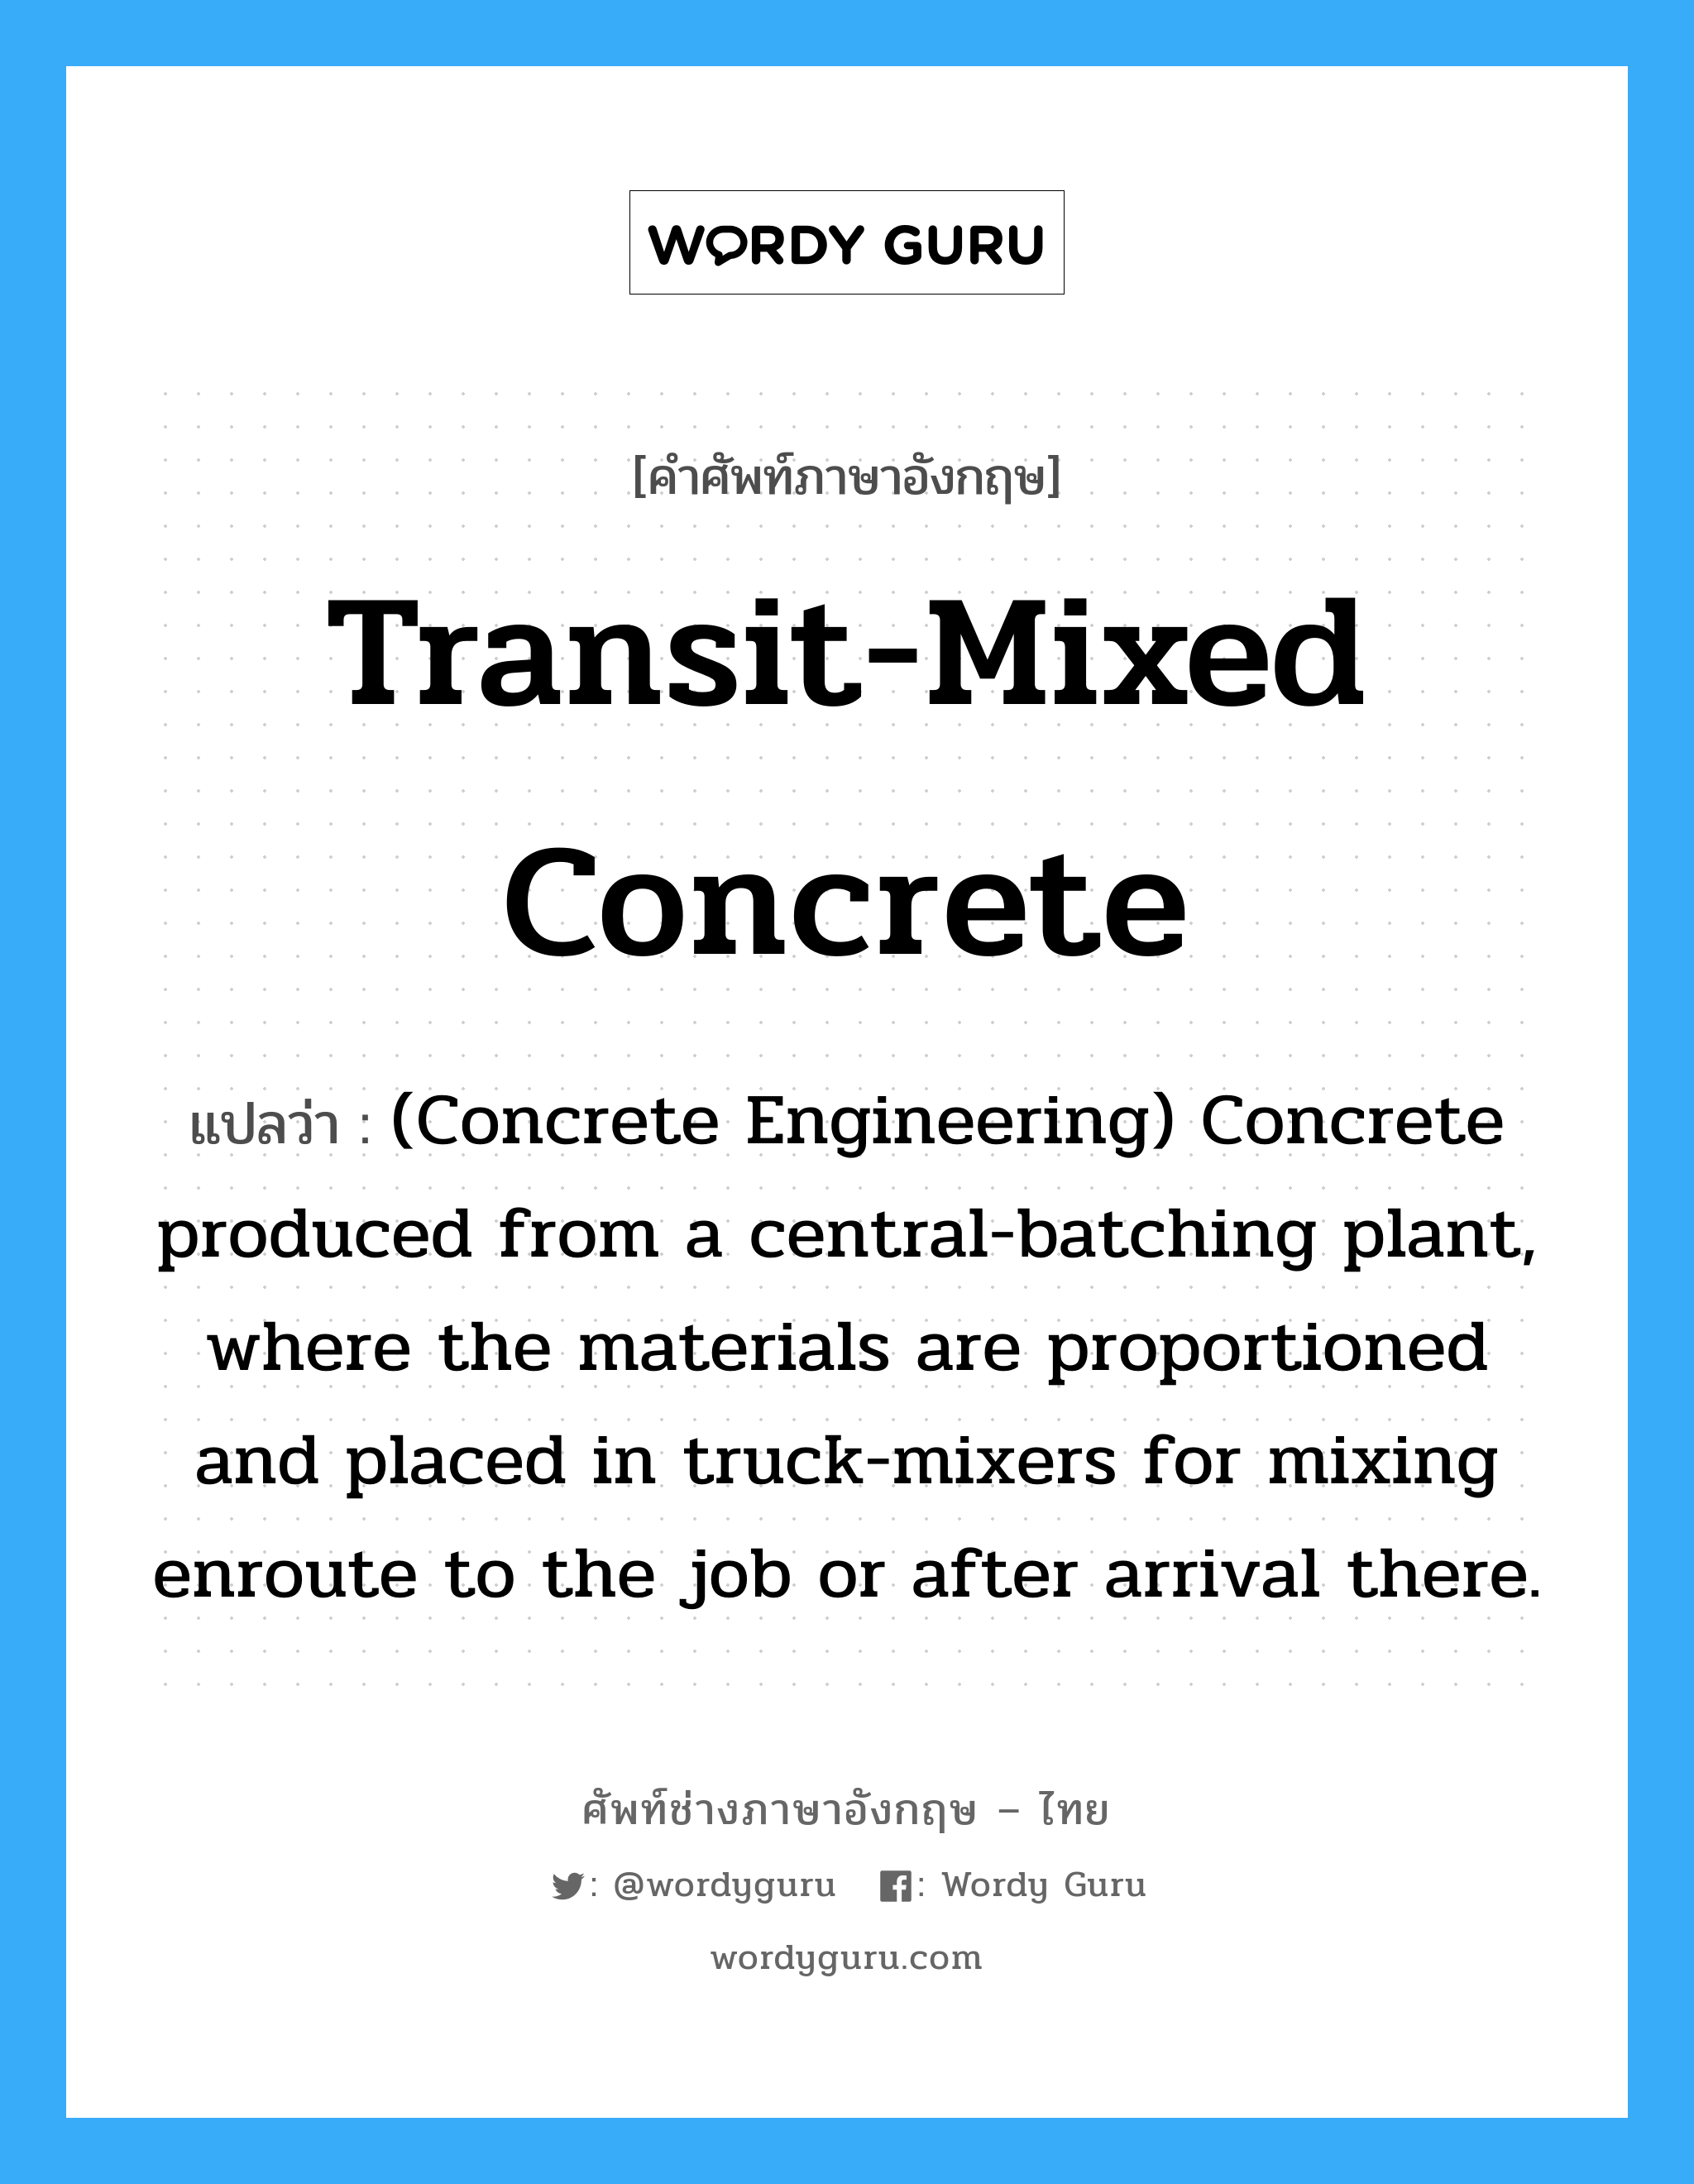 Transit-Mixed Concrete แปลว่า?, คำศัพท์ช่างภาษาอังกฤษ - ไทย Transit-Mixed Concrete คำศัพท์ภาษาอังกฤษ Transit-Mixed Concrete แปลว่า (Concrete Engineering) Concrete produced from a central-batching plant, where the materials are proportioned and placed in truck-mixers for mixing enroute to the job or after arrival there.